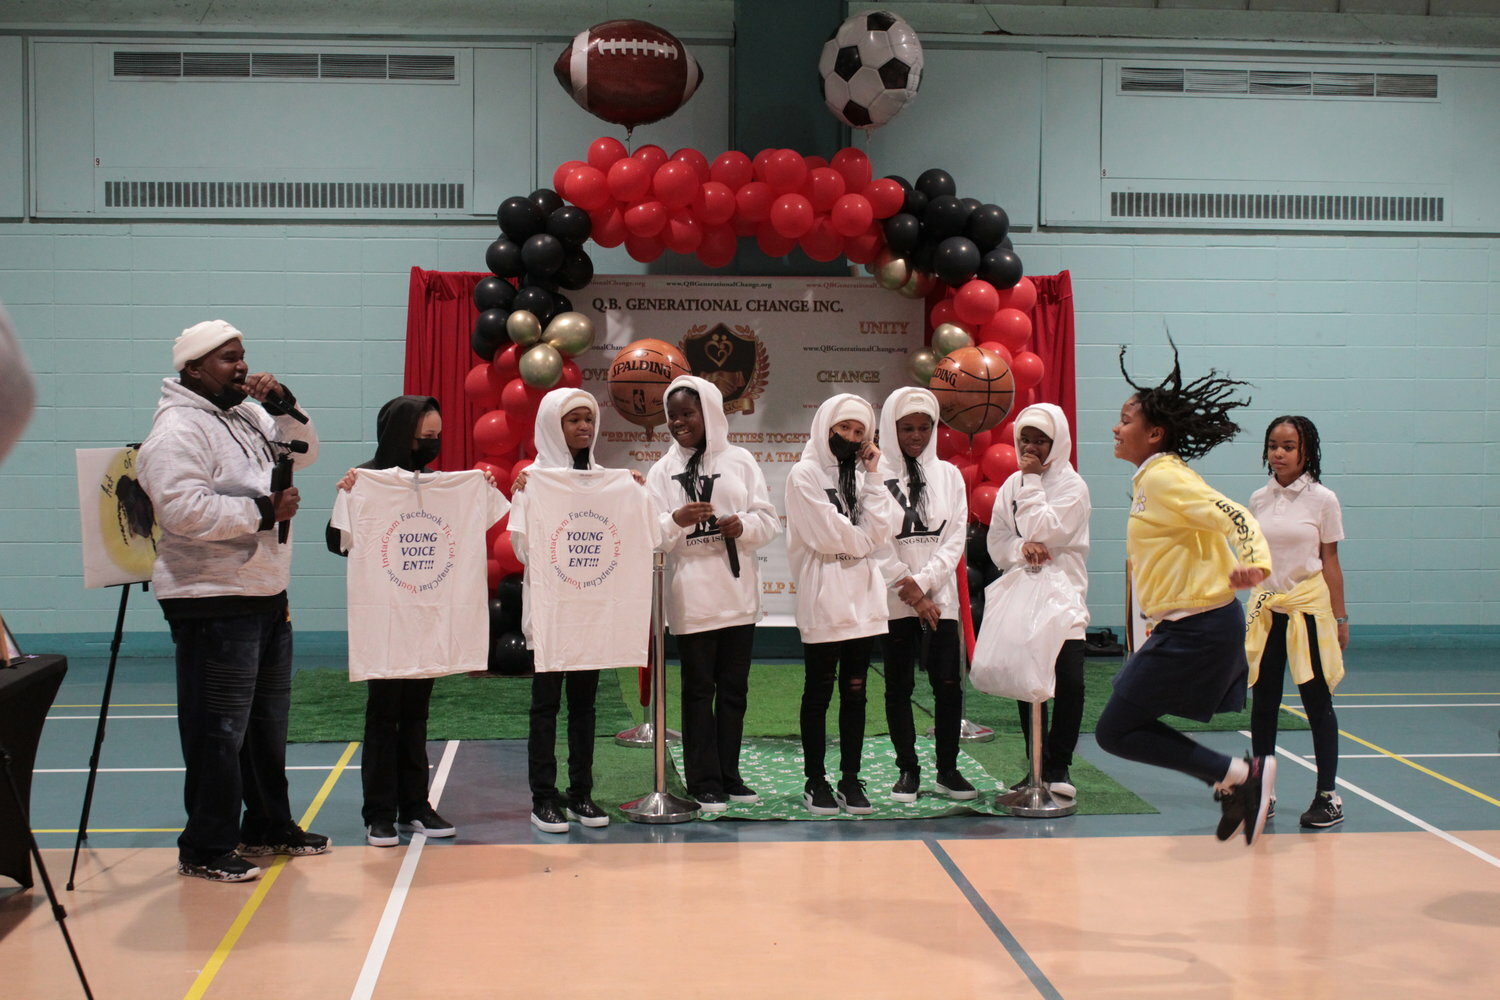 On Dec. 3 at the Freeport Recreation Center, Q.B. Generational Change hosted one of its expos, during which the dance group Young Voices hosted a dance competition.